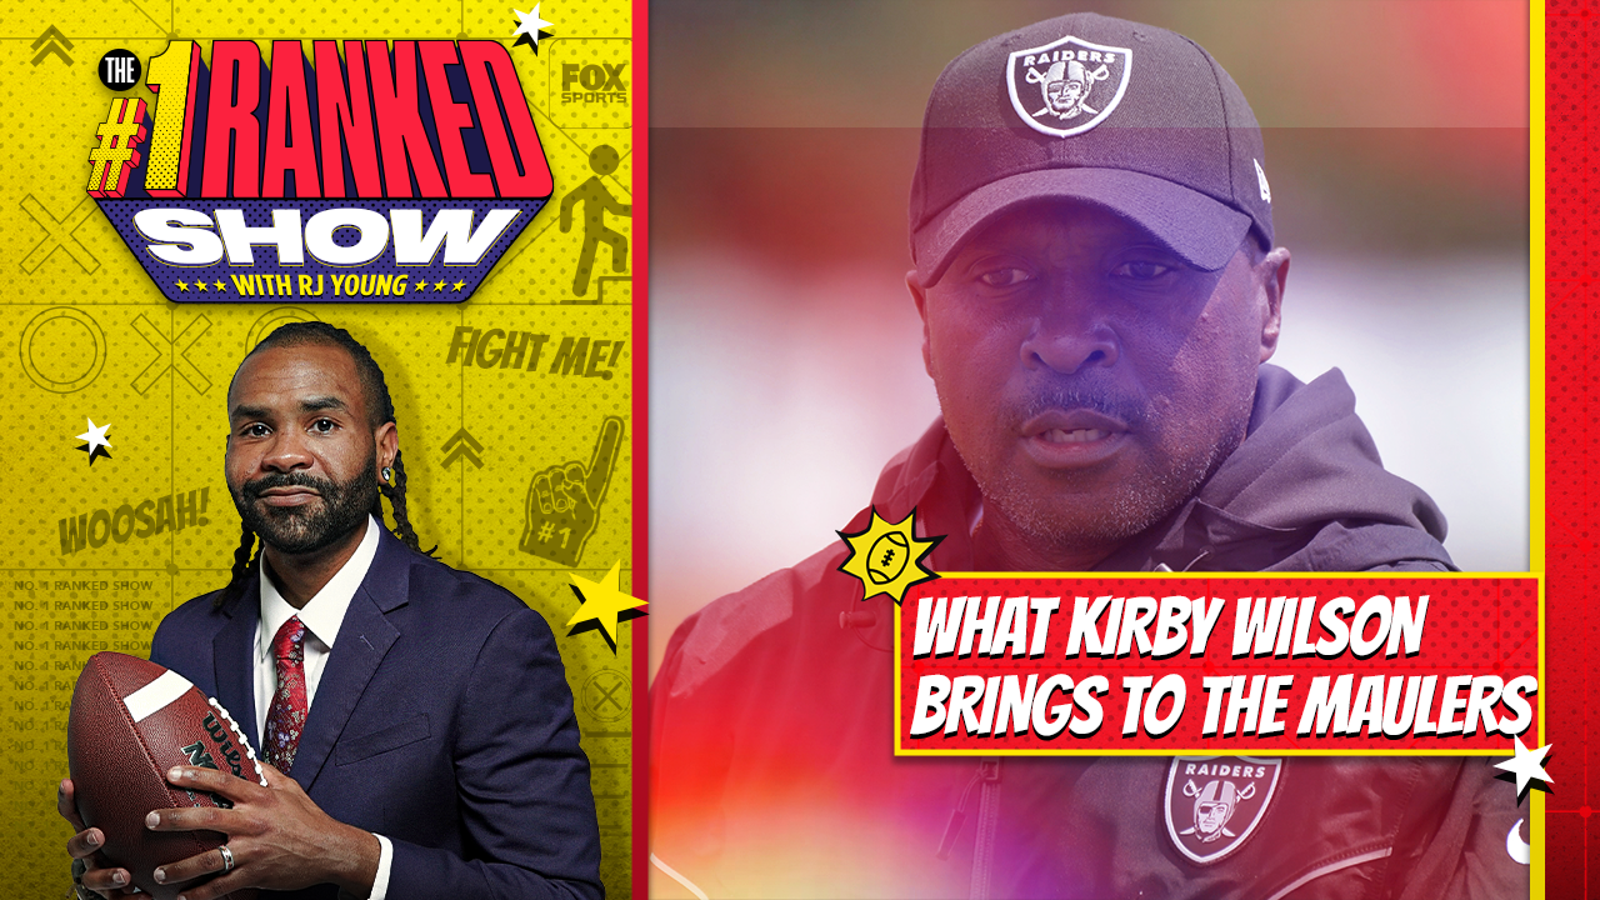 Kirby Wilson will go "above and beyond"